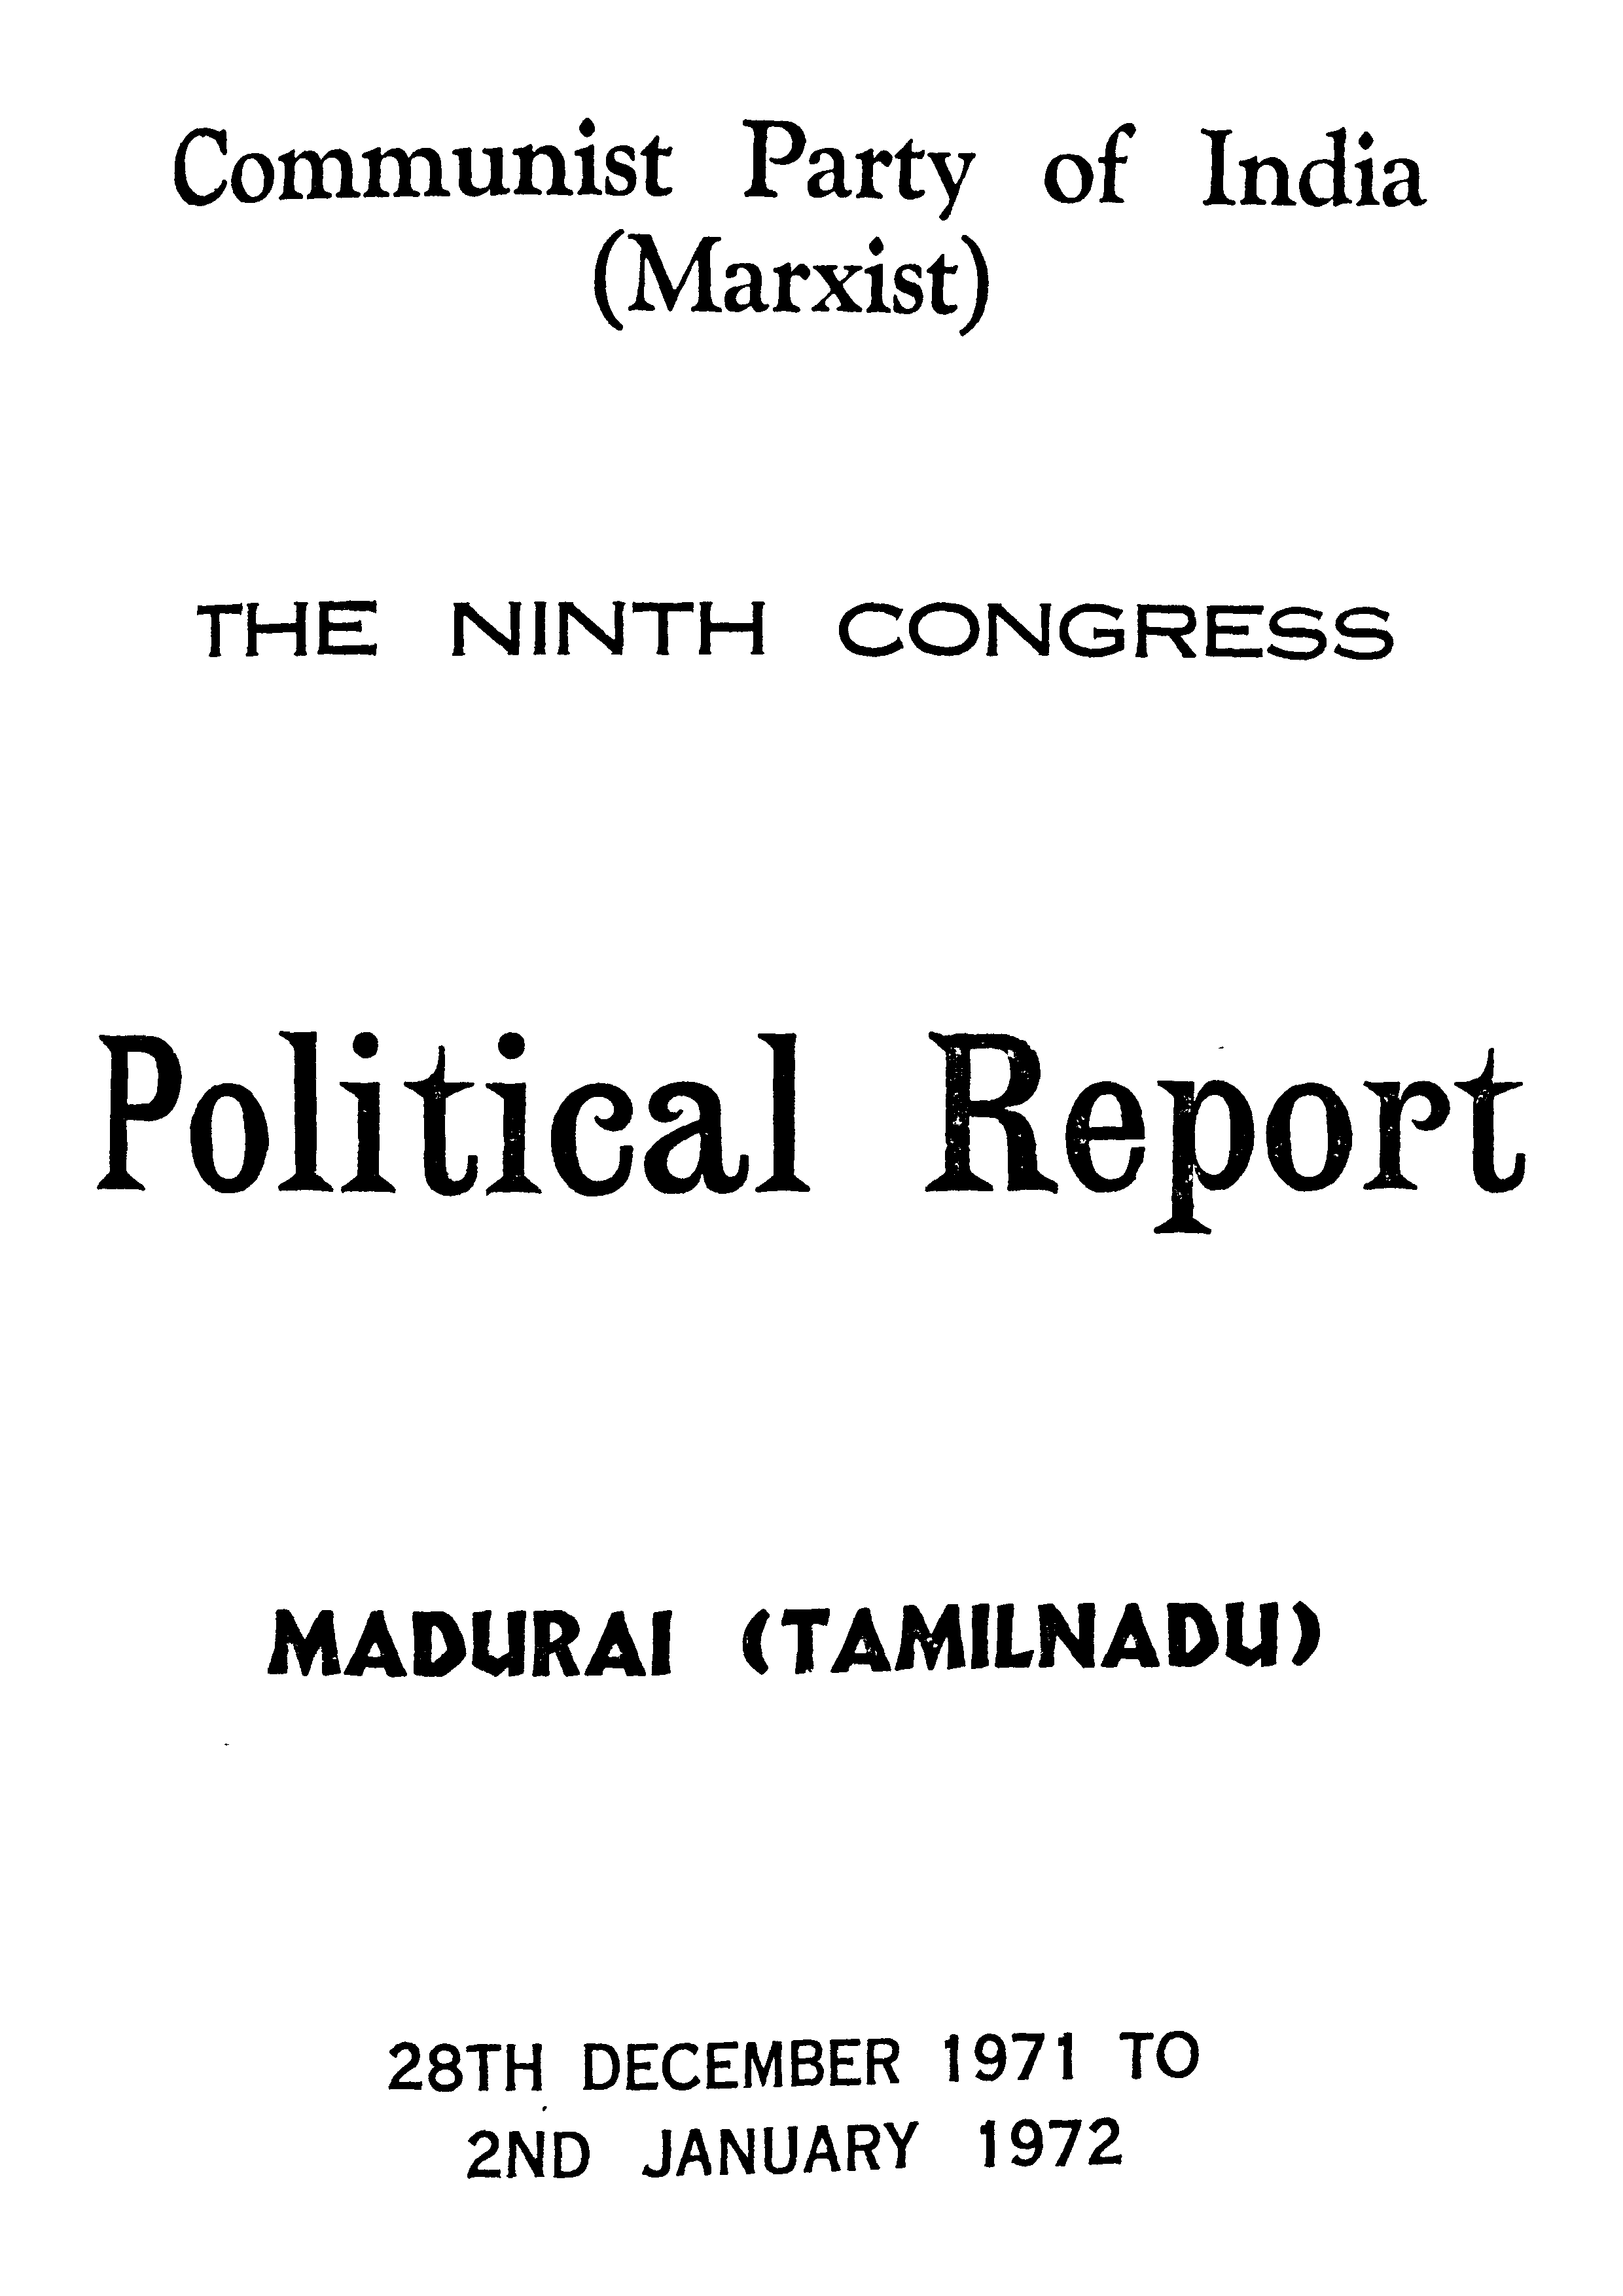 Communist party of india (marxist) the ninth congress (cpolitical report)